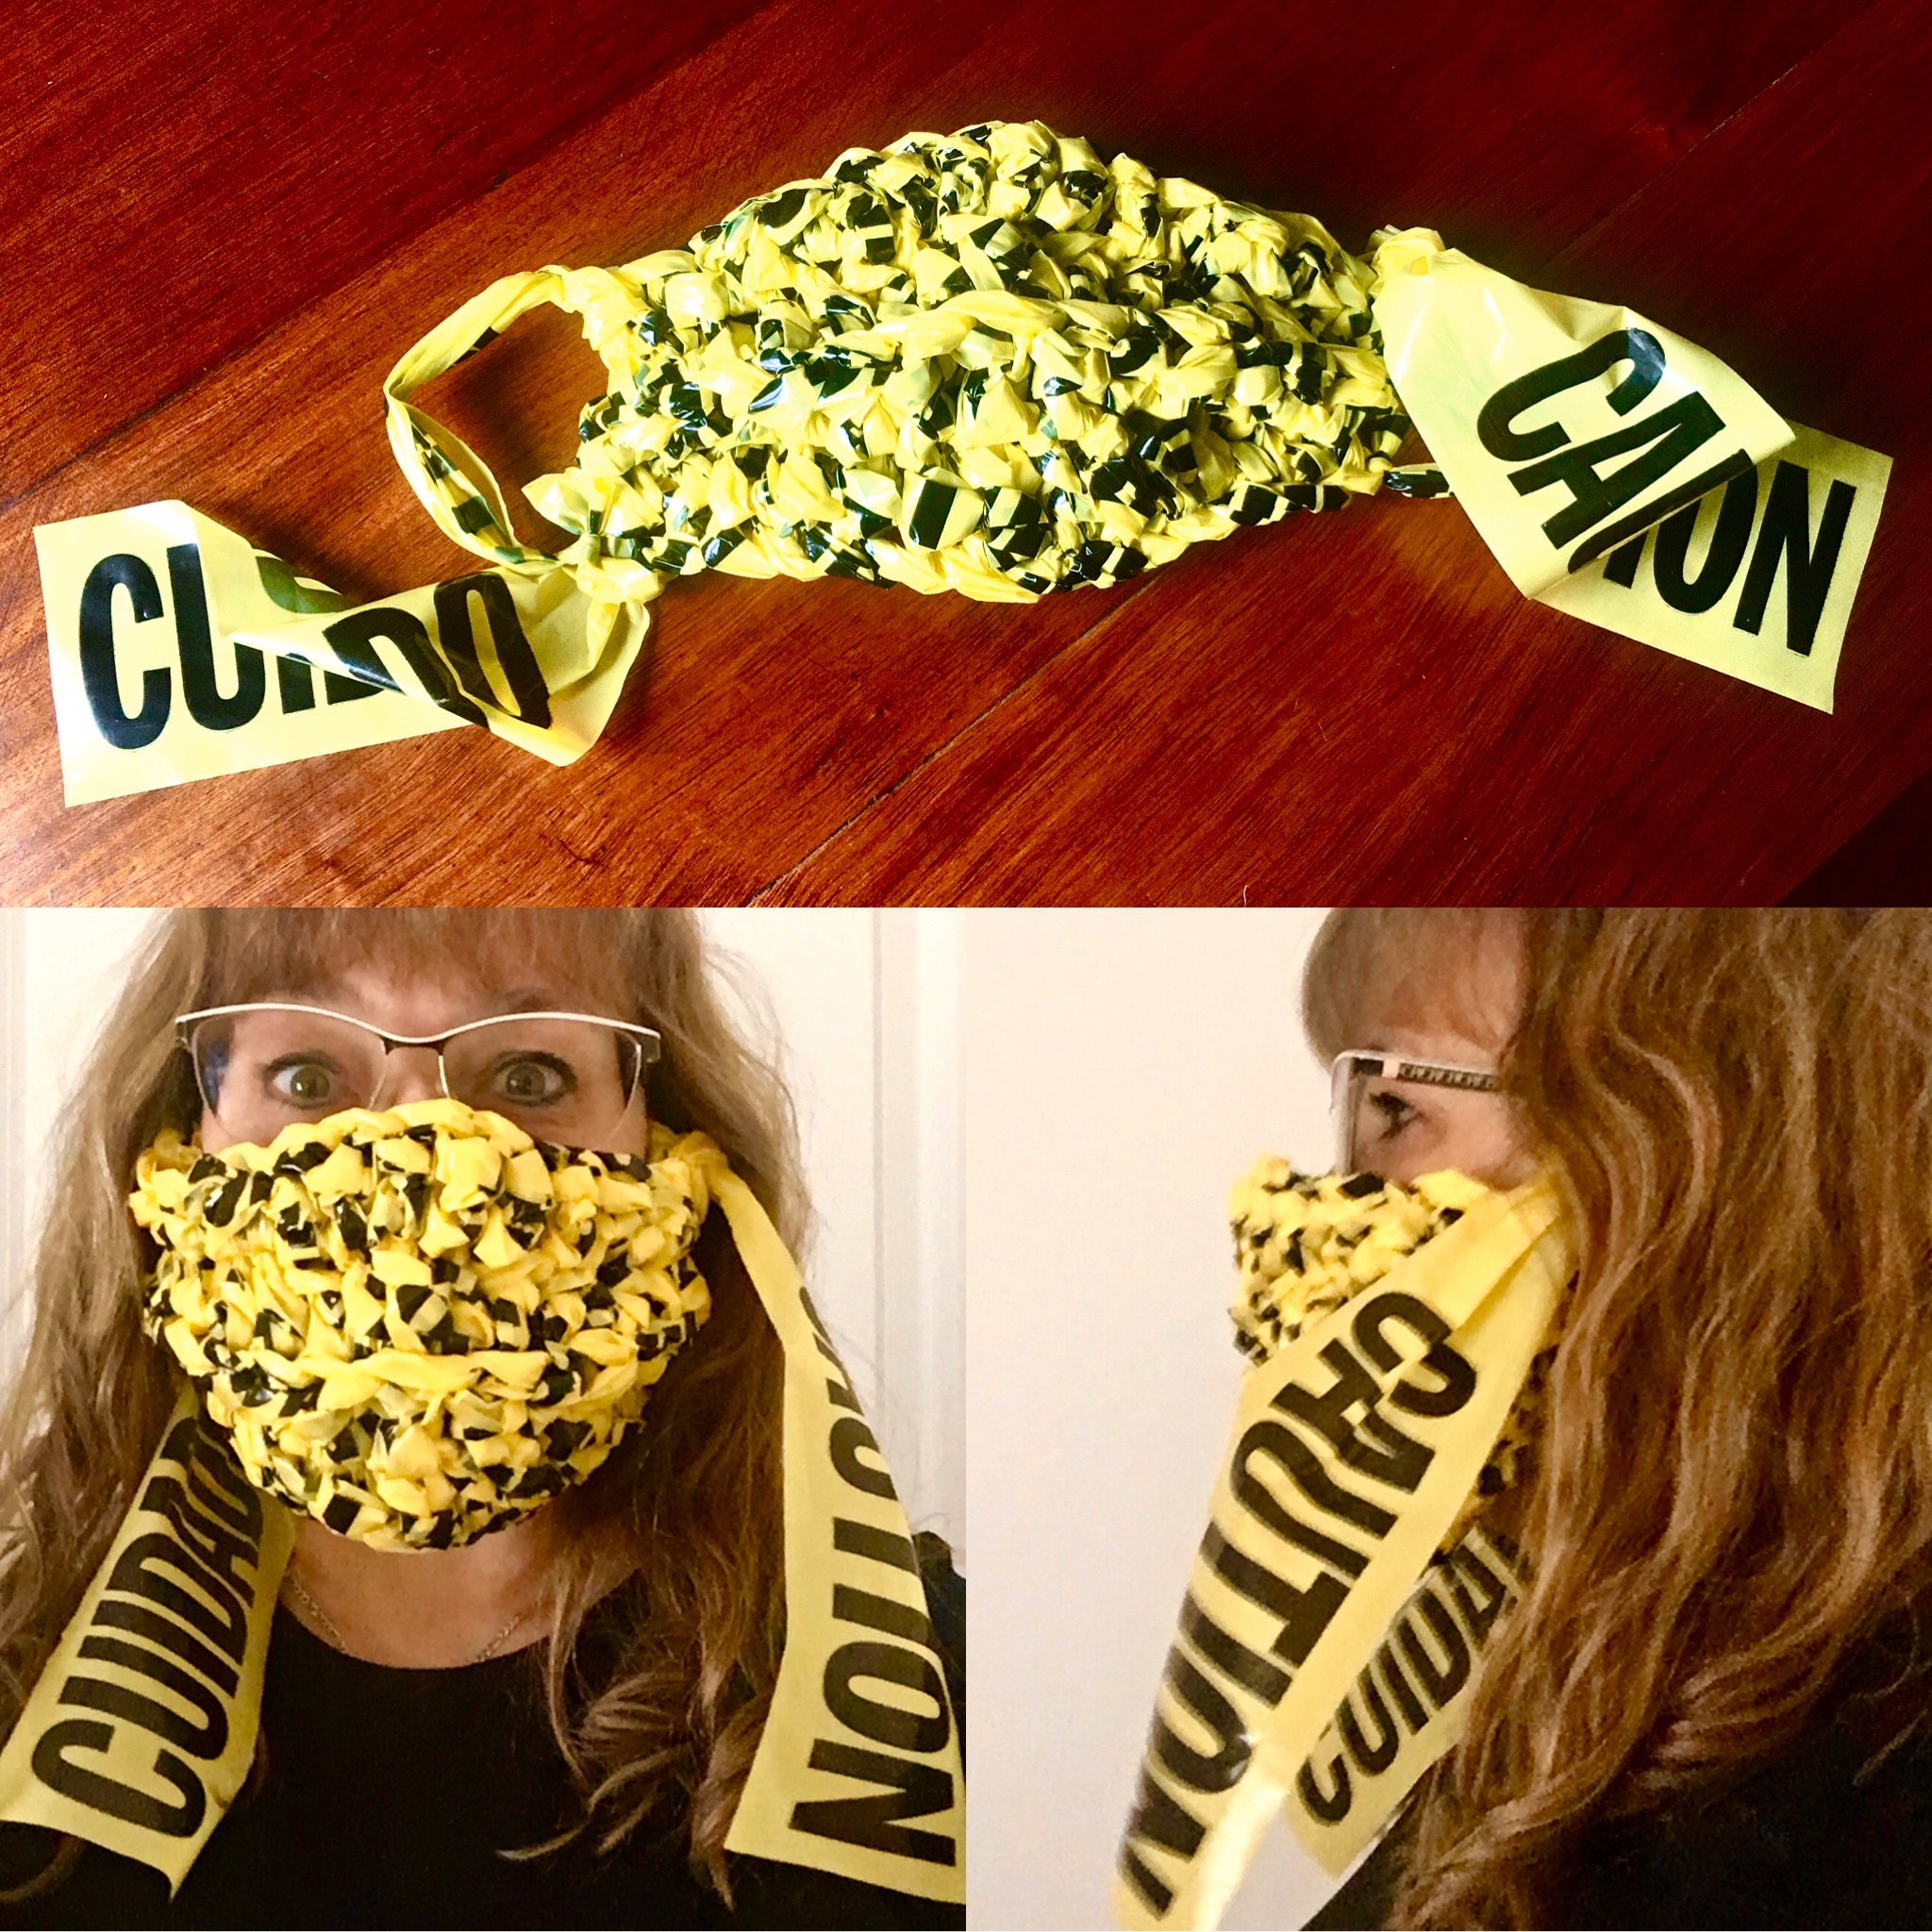 Three photos of a face mask made of yellow caution tape